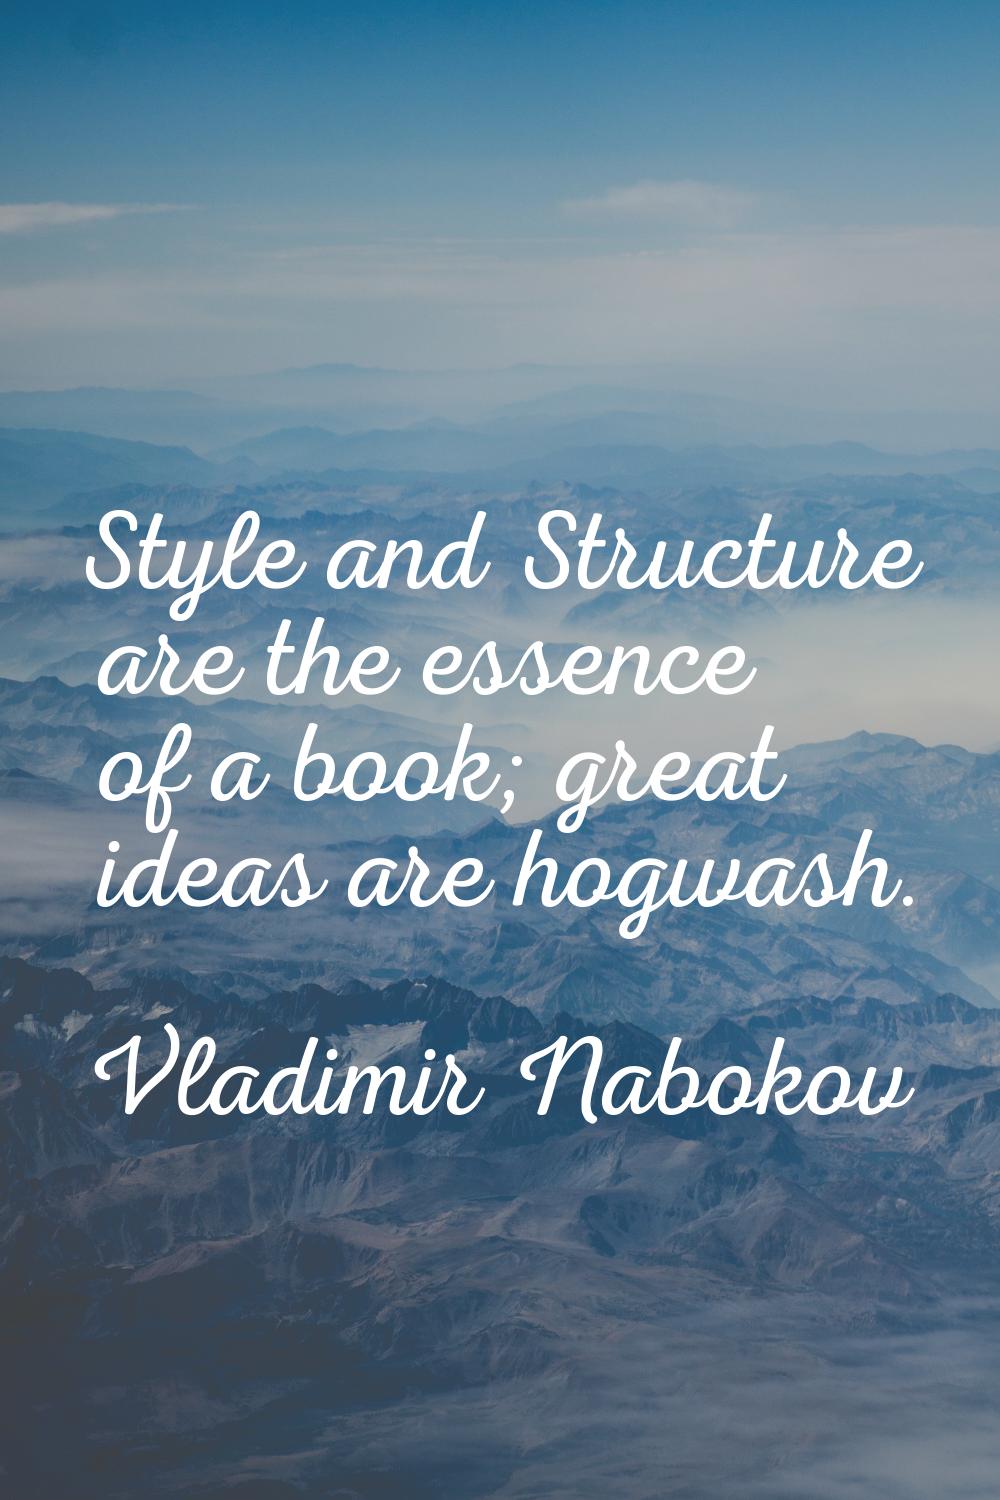 Style and Structure are the essence of a book; great ideas are hogwash.